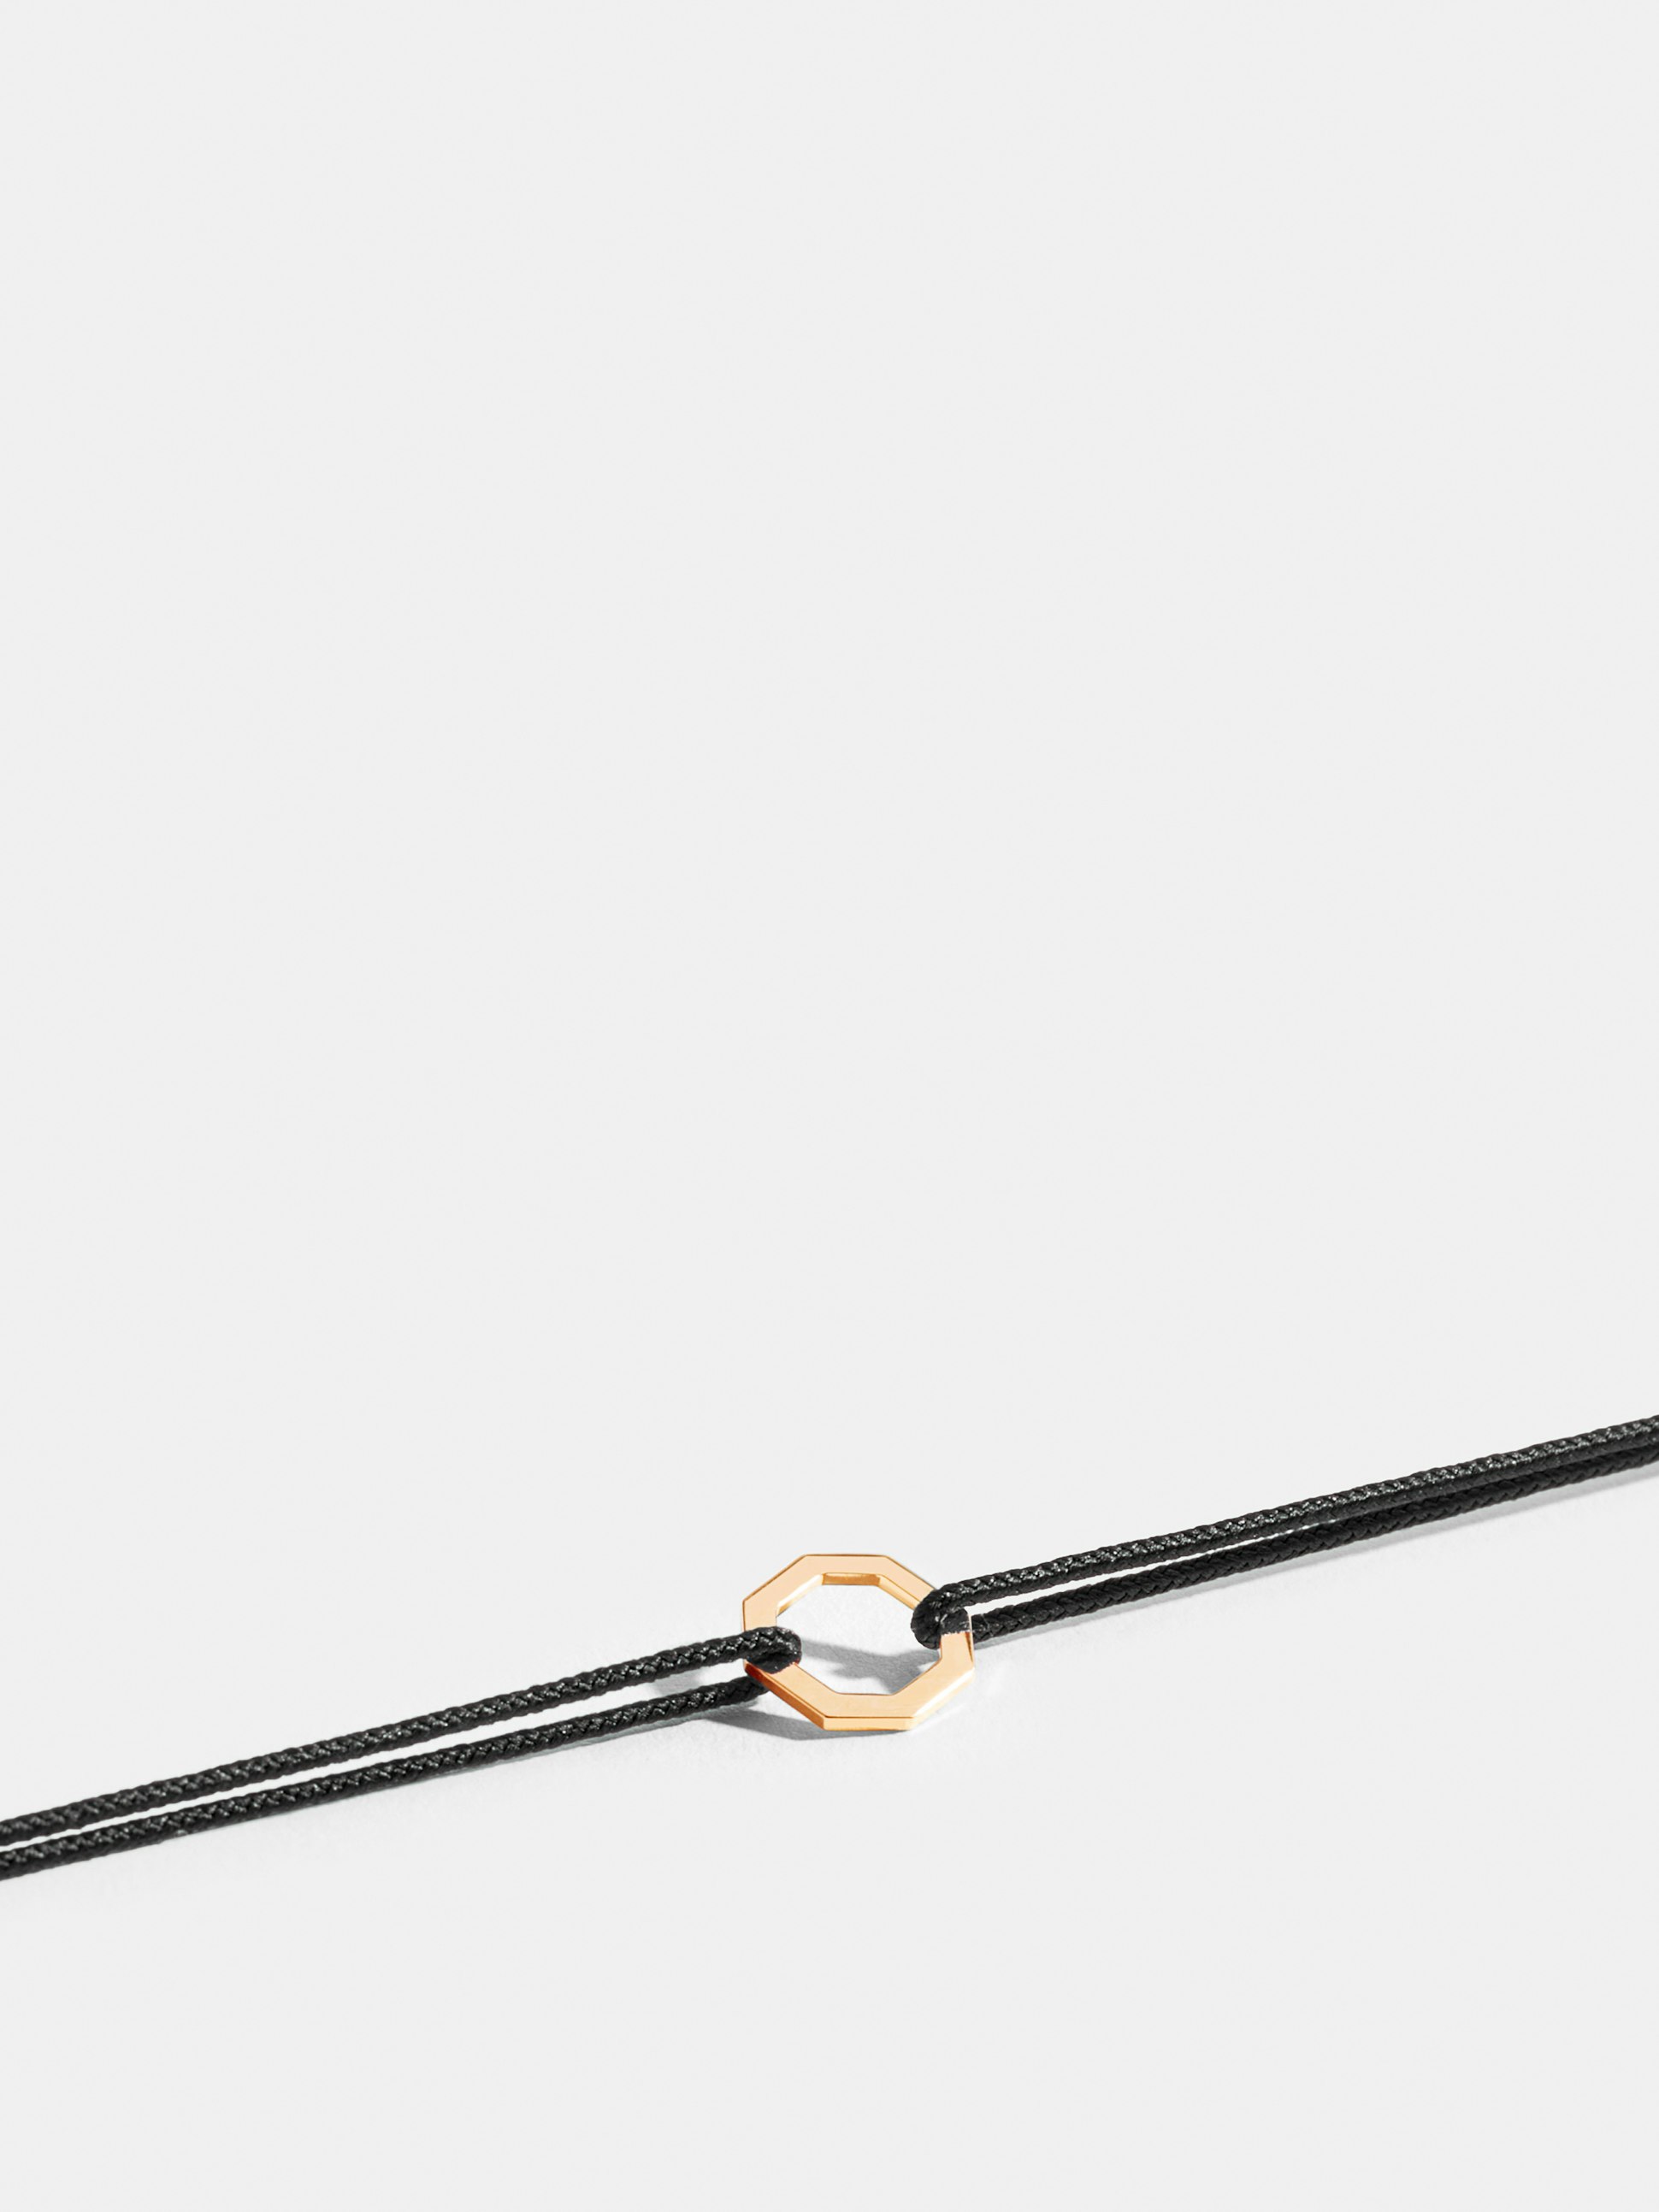 Octogone motif in 18k Fairmined ethical yellow gold, on a cord. 